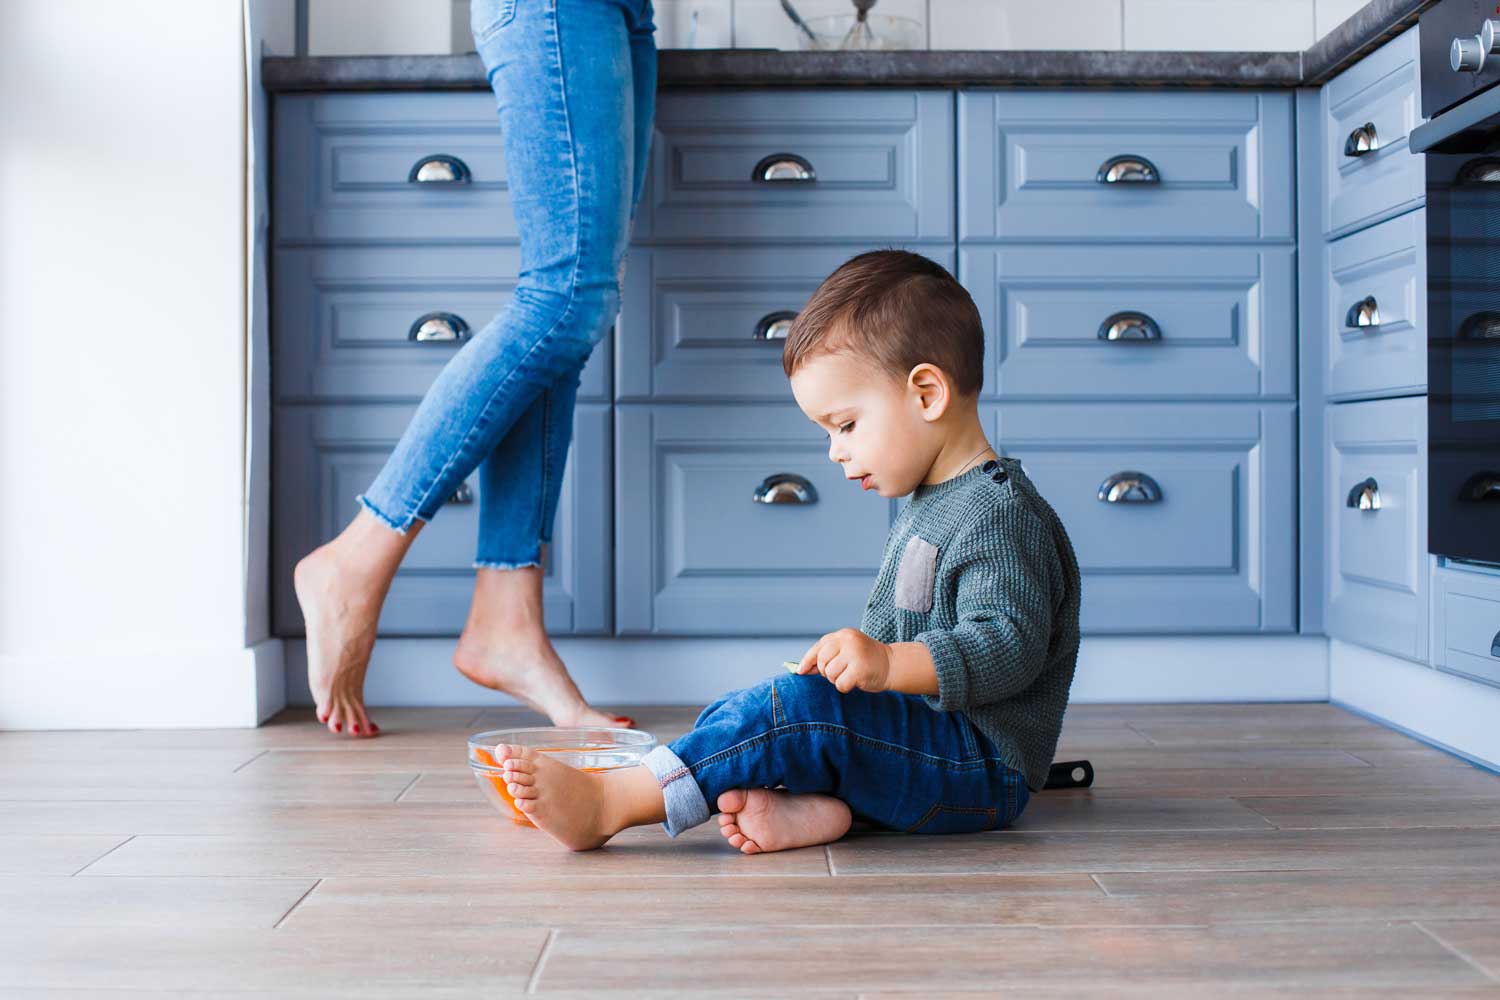 A kid sitting on a trendy neutral color floor - flooring services provided by Footprints Floors.